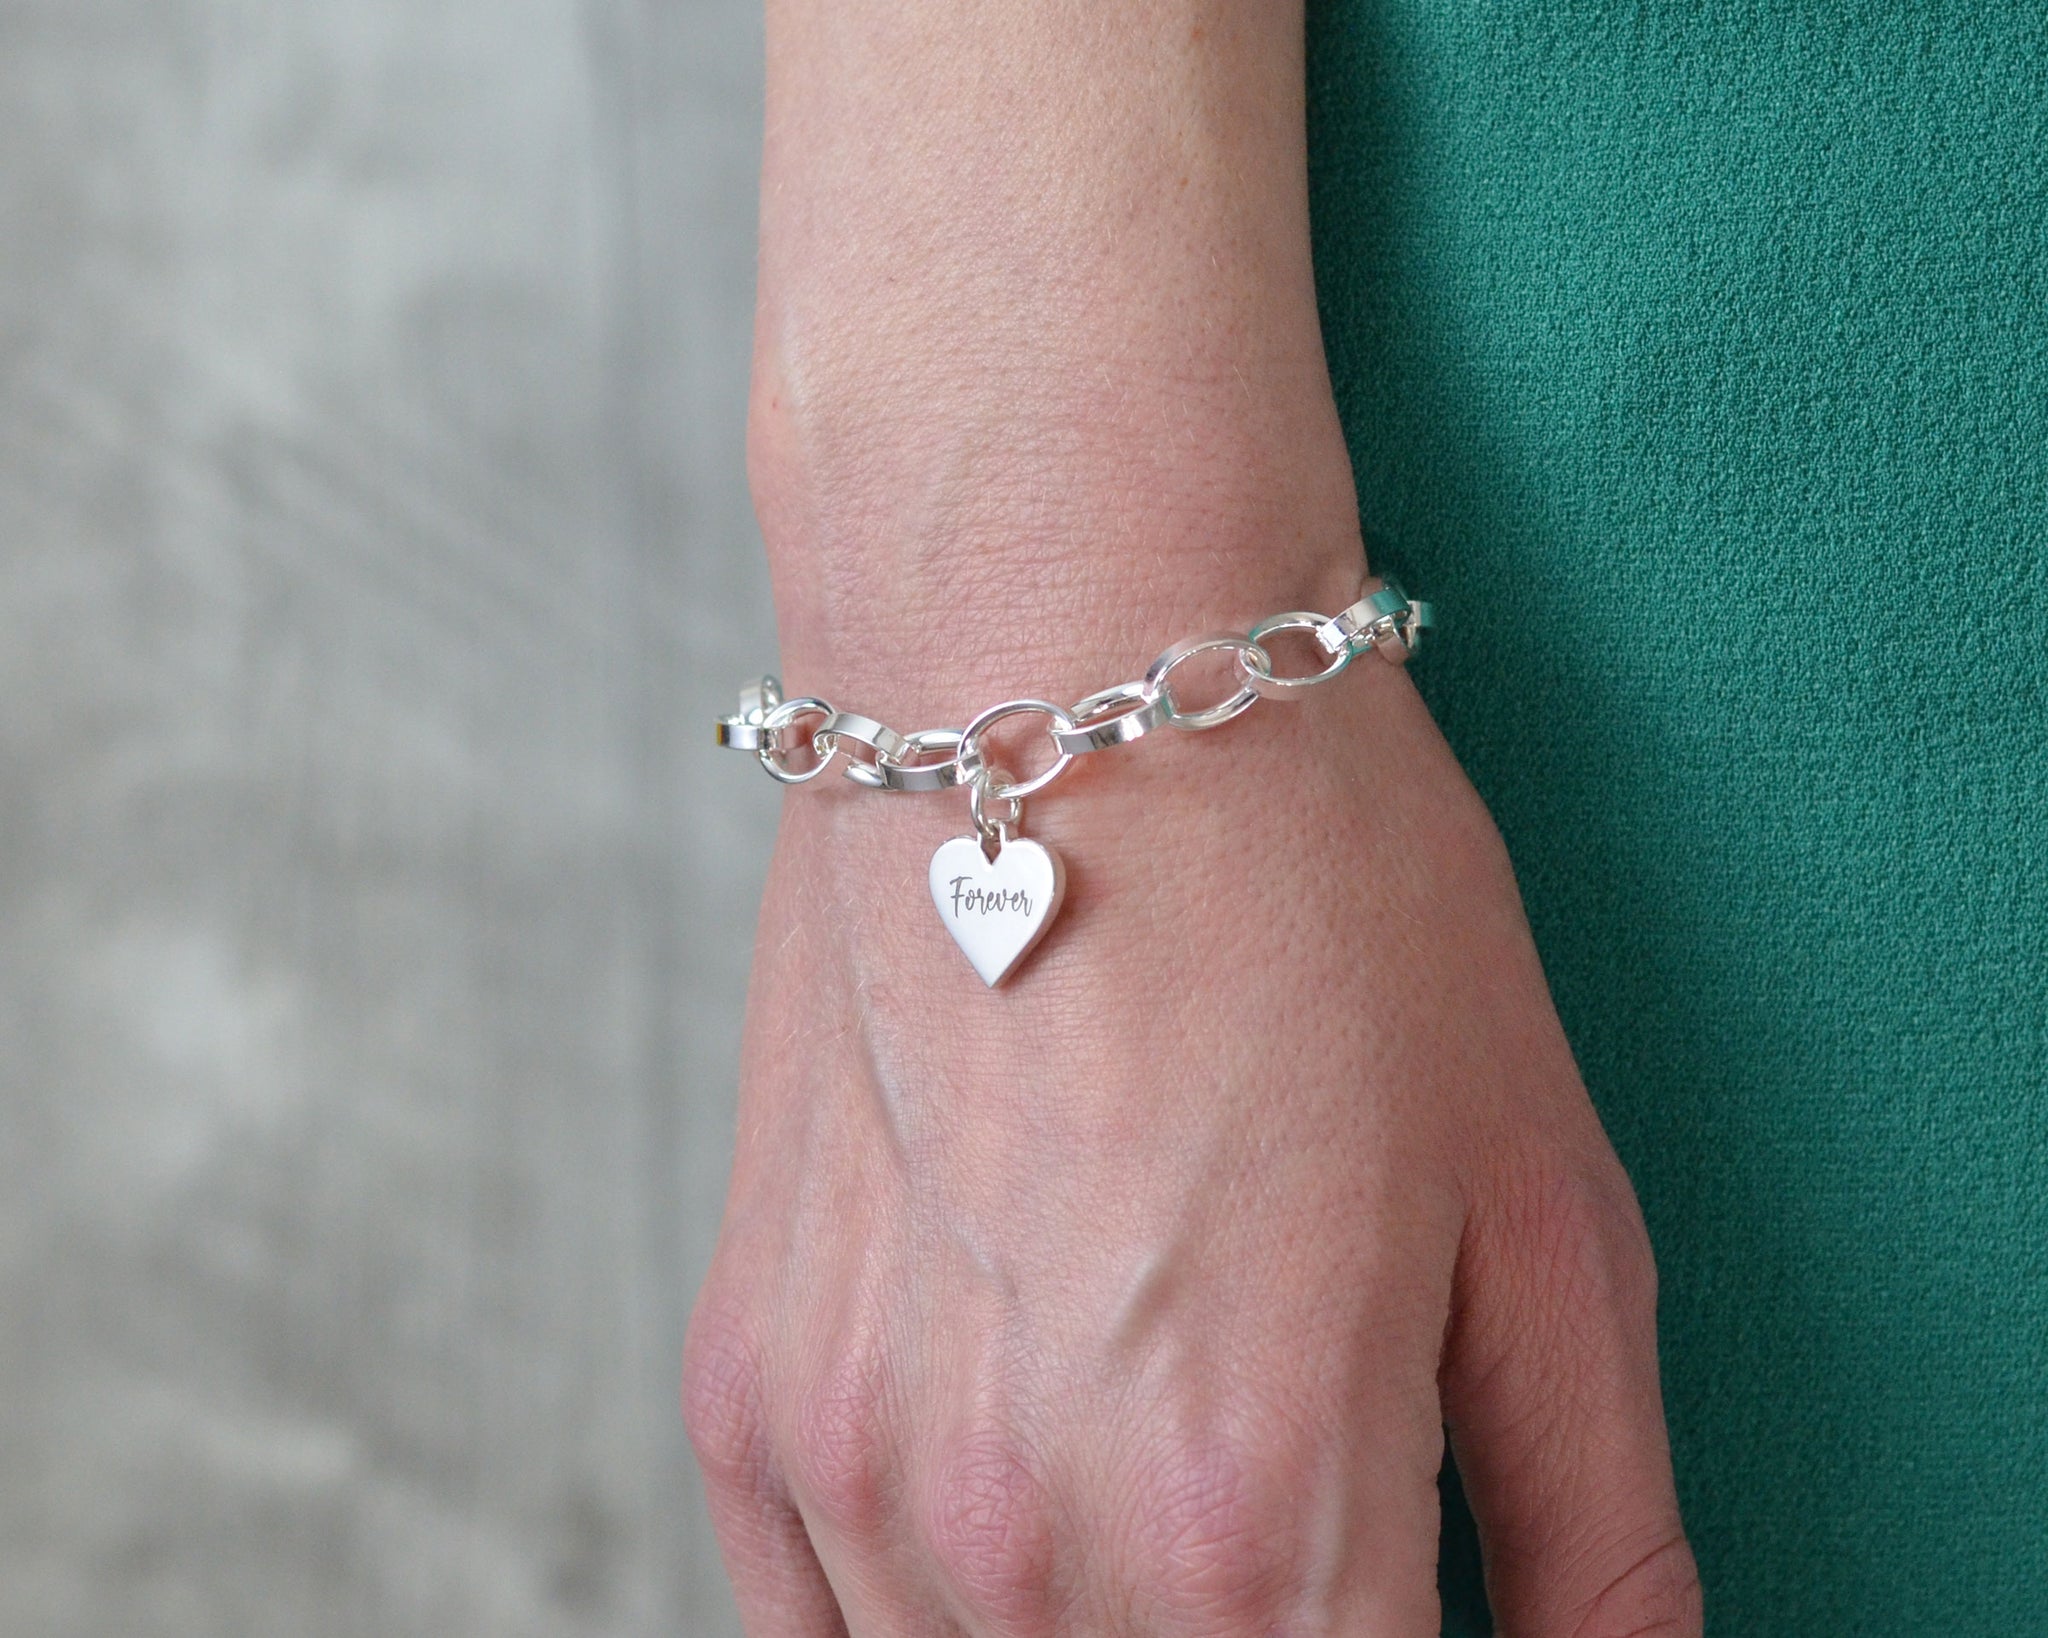 What Are Charm Bracelets & What Do They Mean? - Wellesley Row